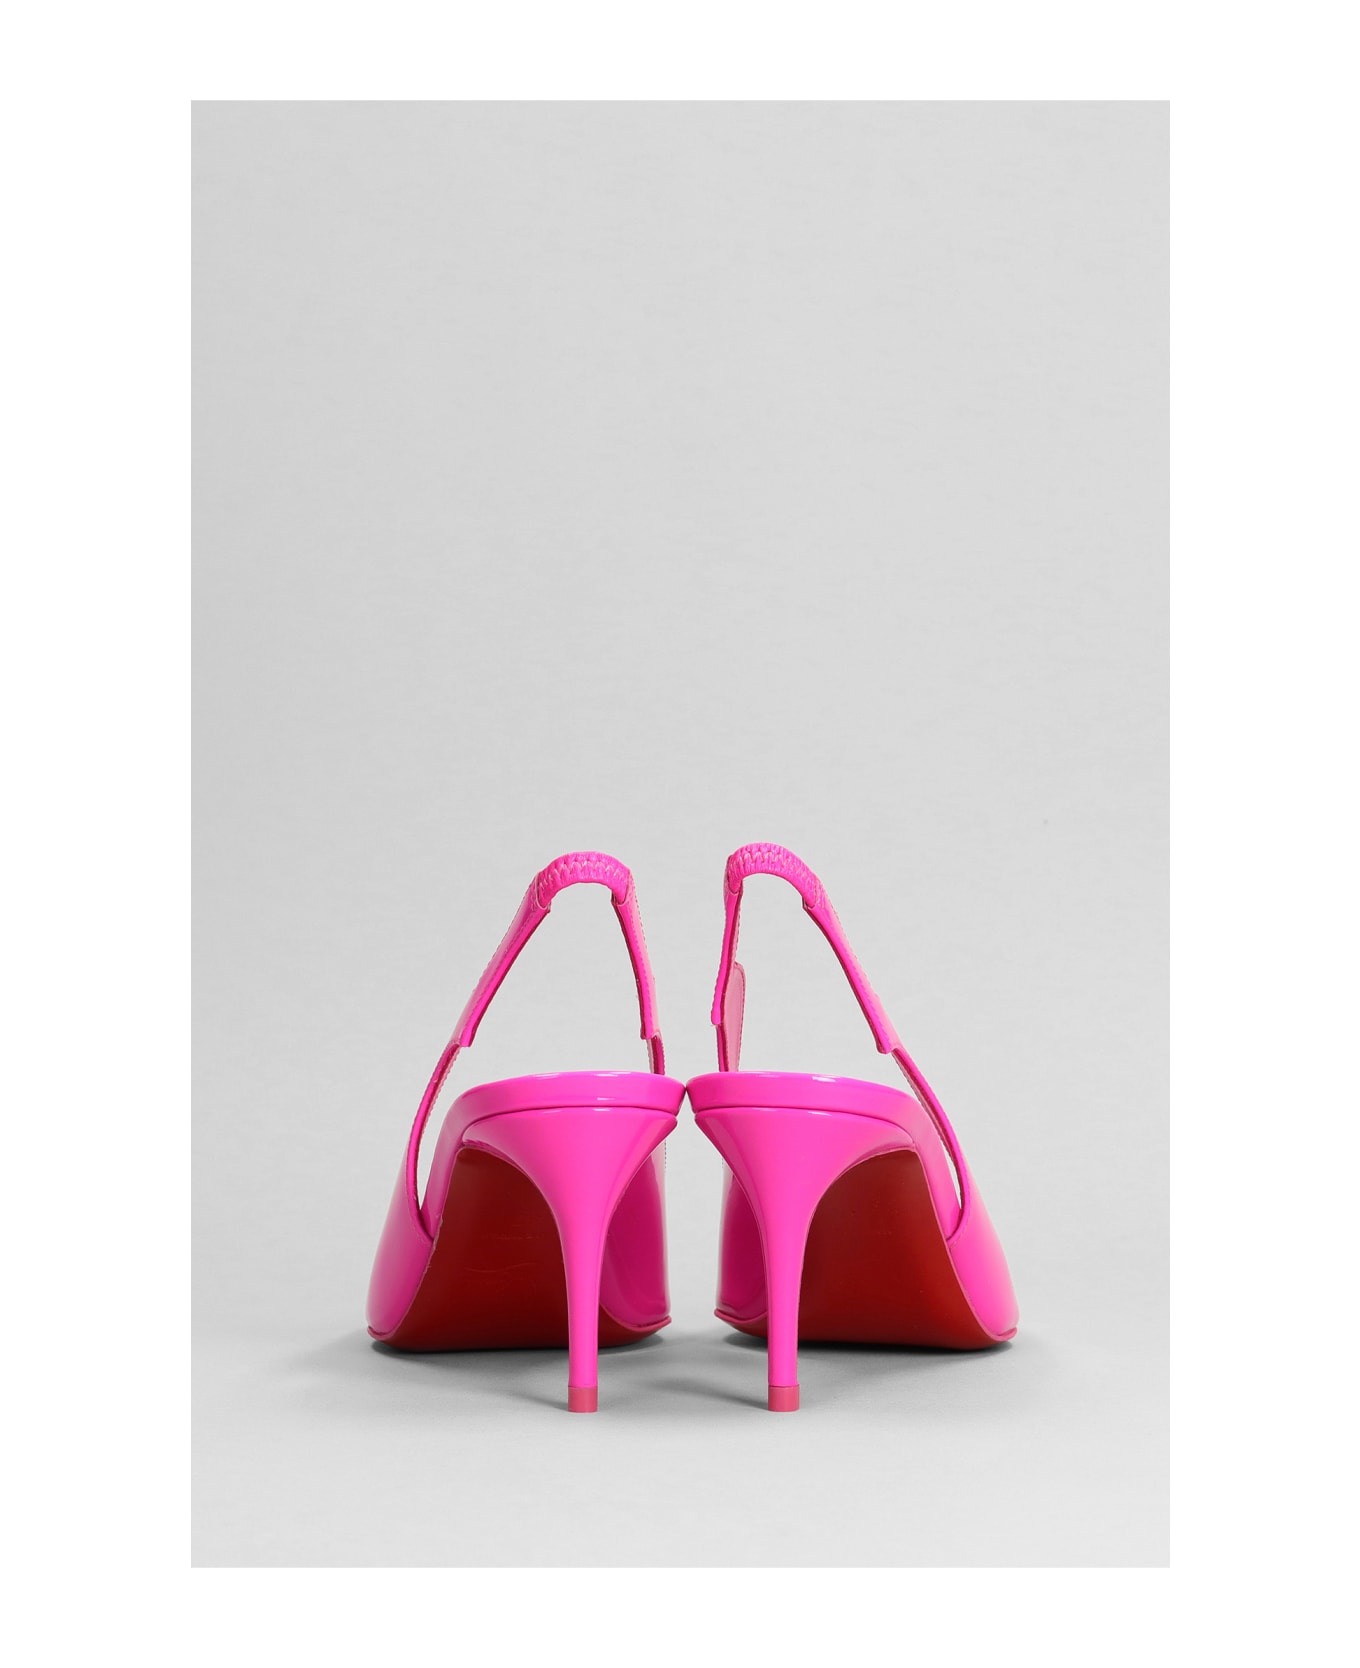 Christian Louboutin Hot Chick Sling Pumps In Rose-pink Patent Leather - rose-pink ハイヒール